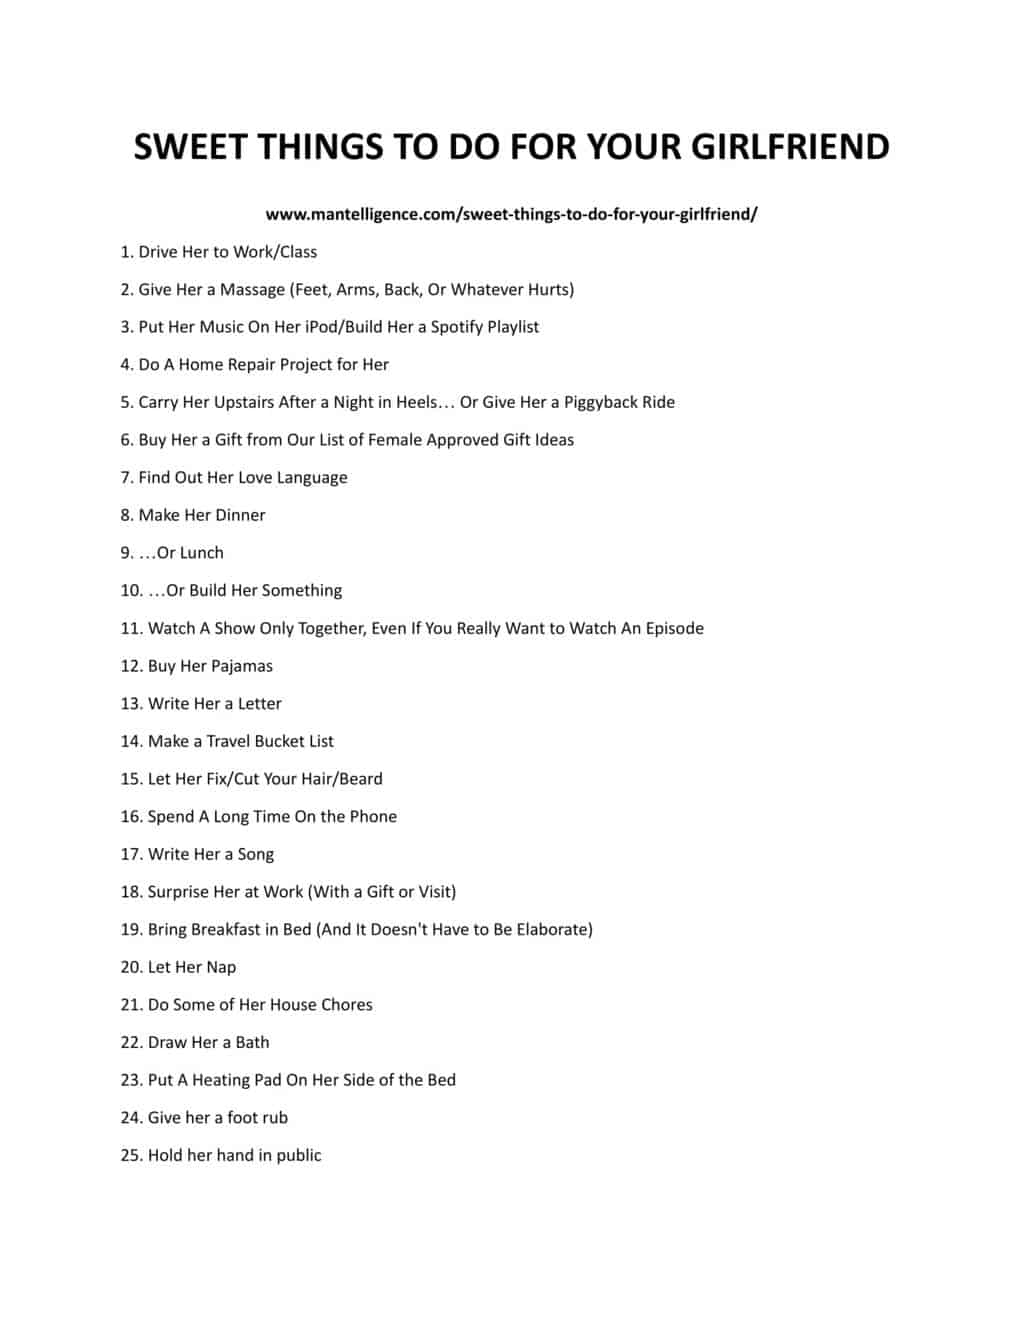 A downloadable list of things to do for your girlfriend